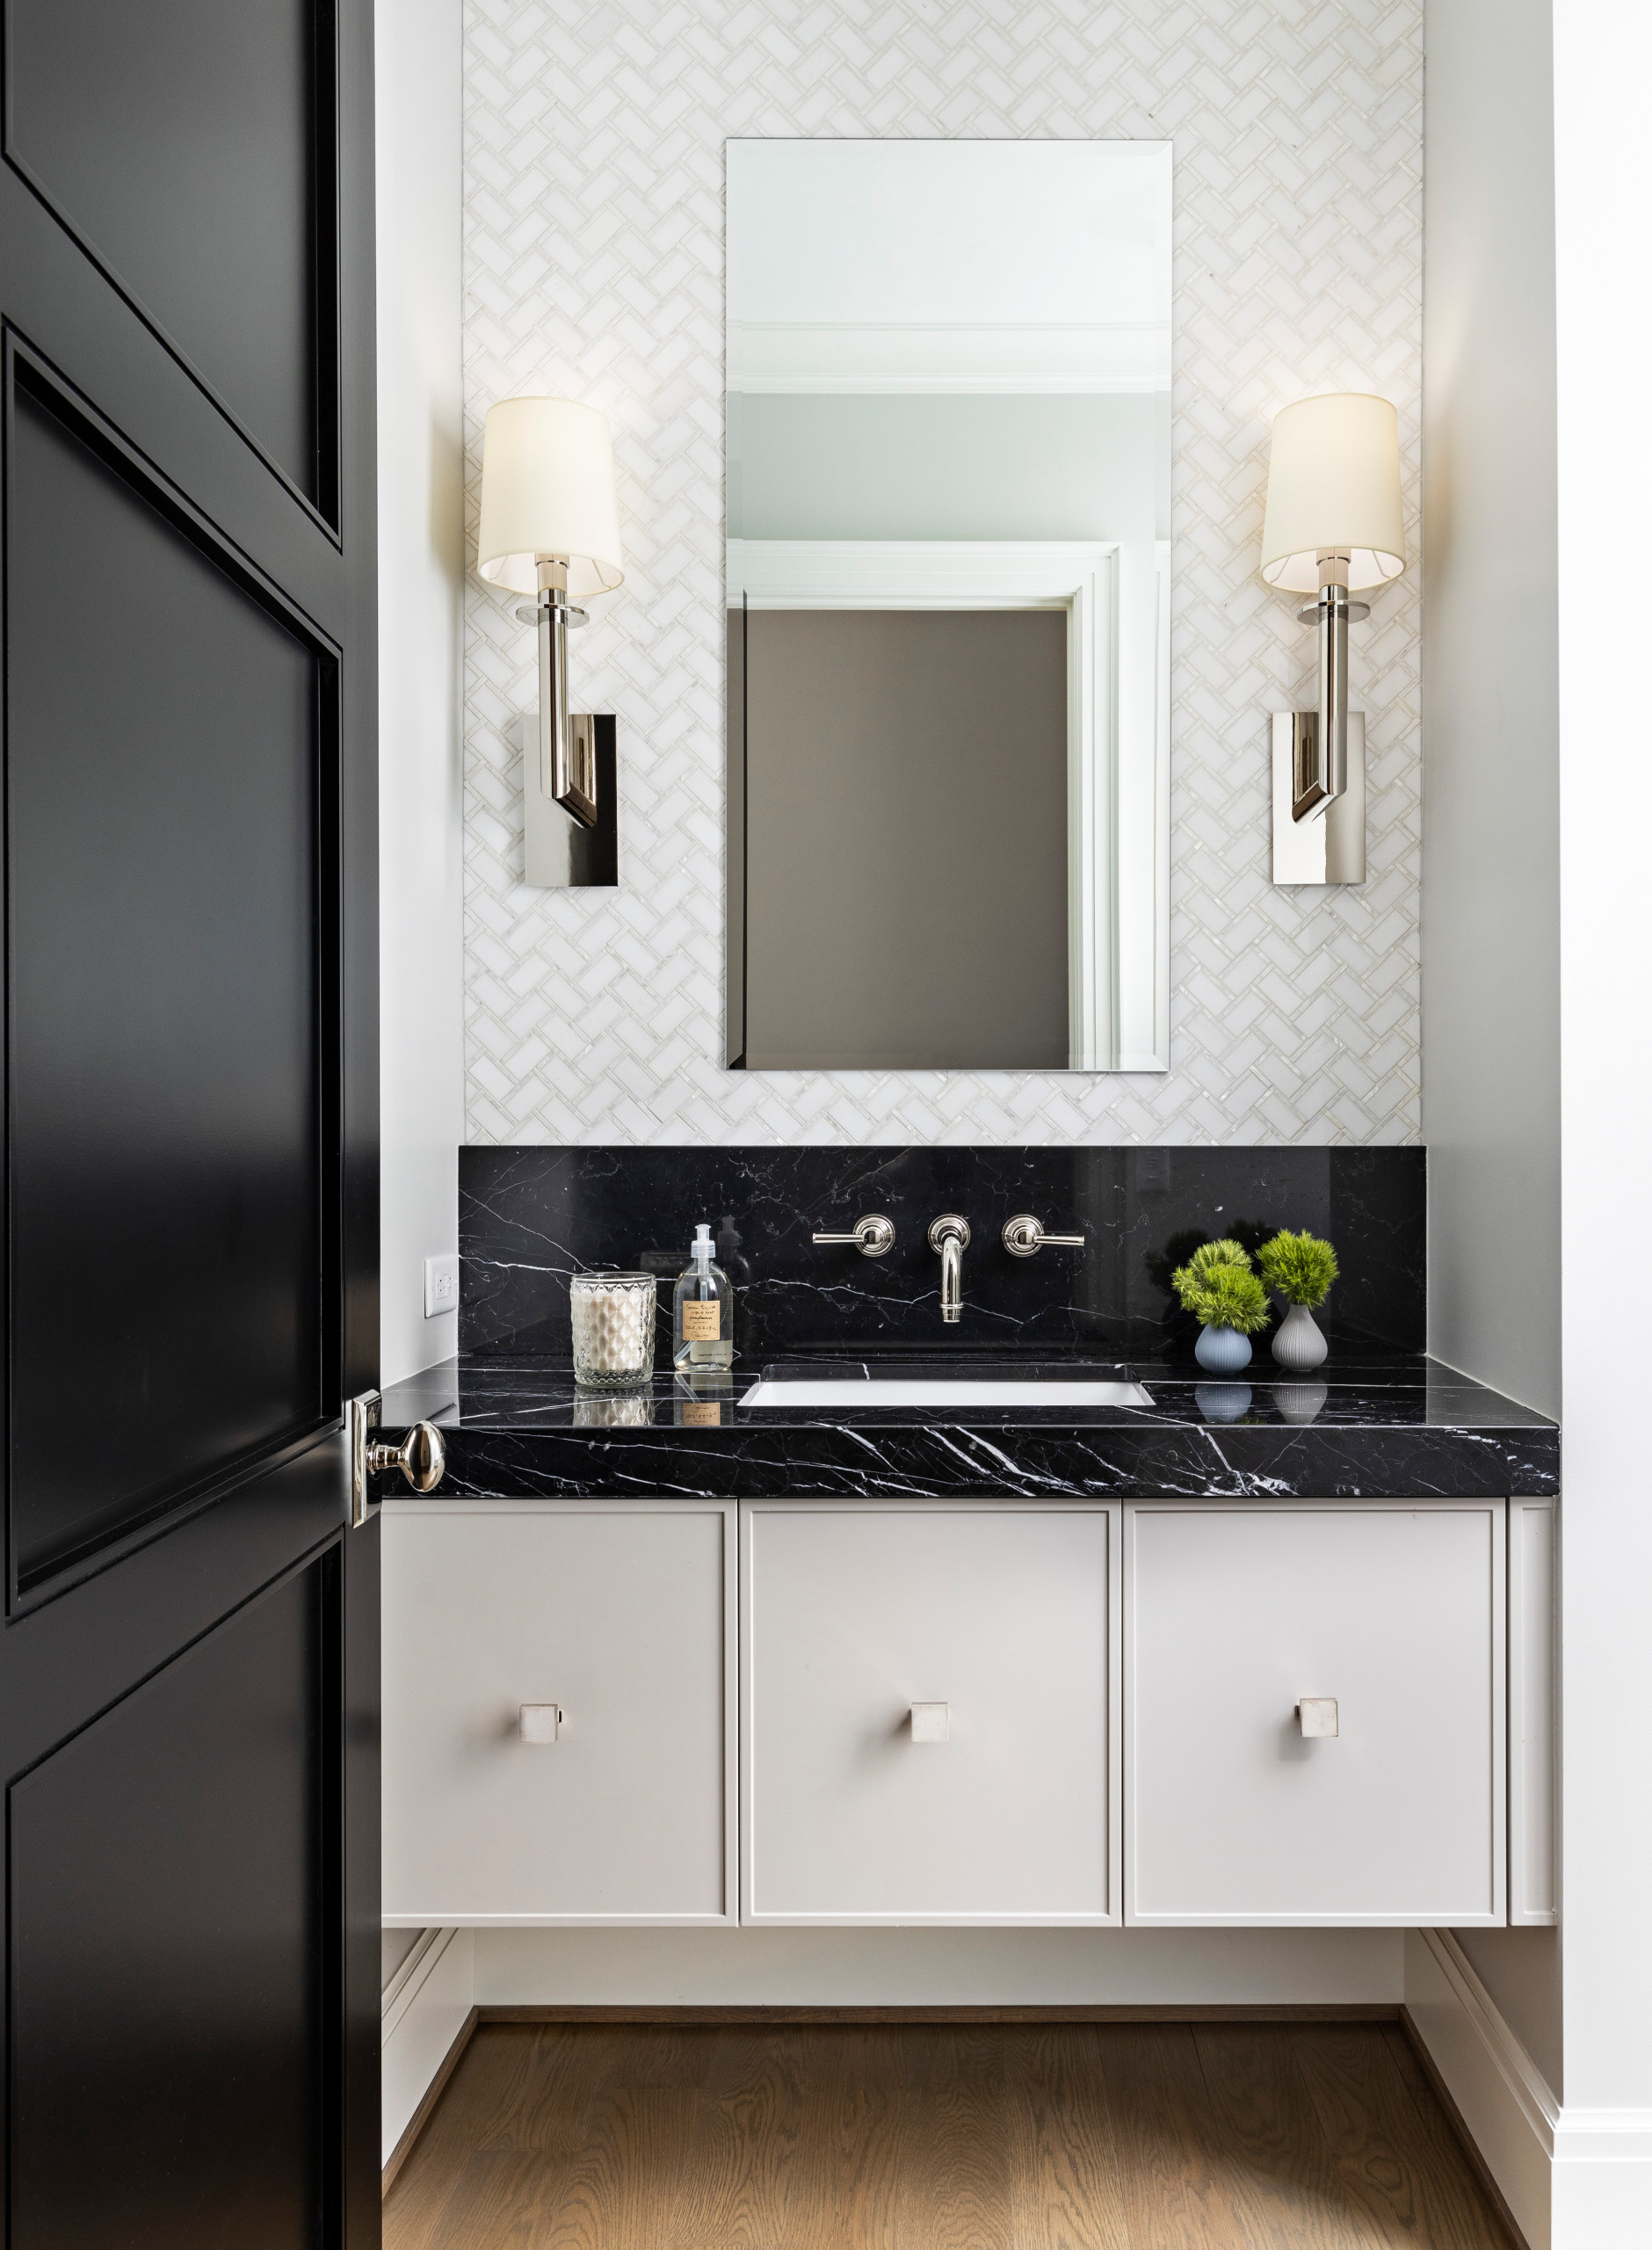 Parisian Powder Room- dramatic lines in black and white create a welcome viewpoint for this powder room entry.